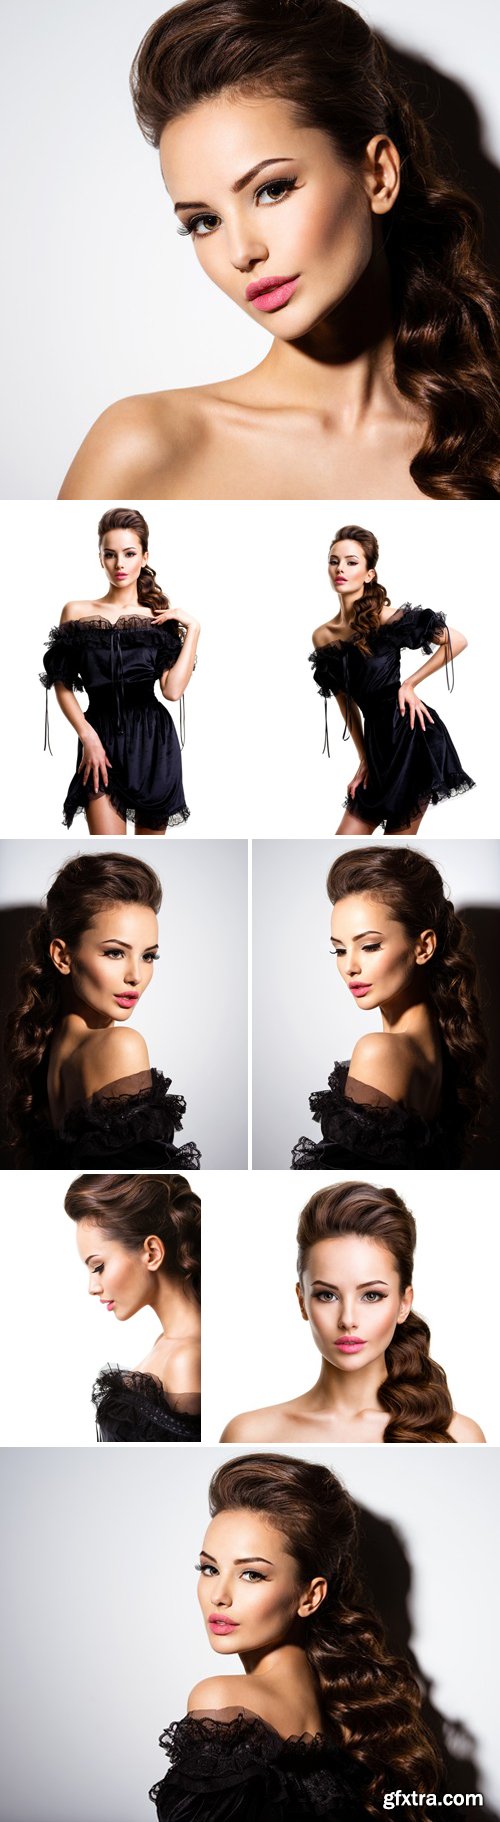 Stock Photos - Beautiful Face Of An Young Sexy Girl In Black Dress Posing At Studio On White Background